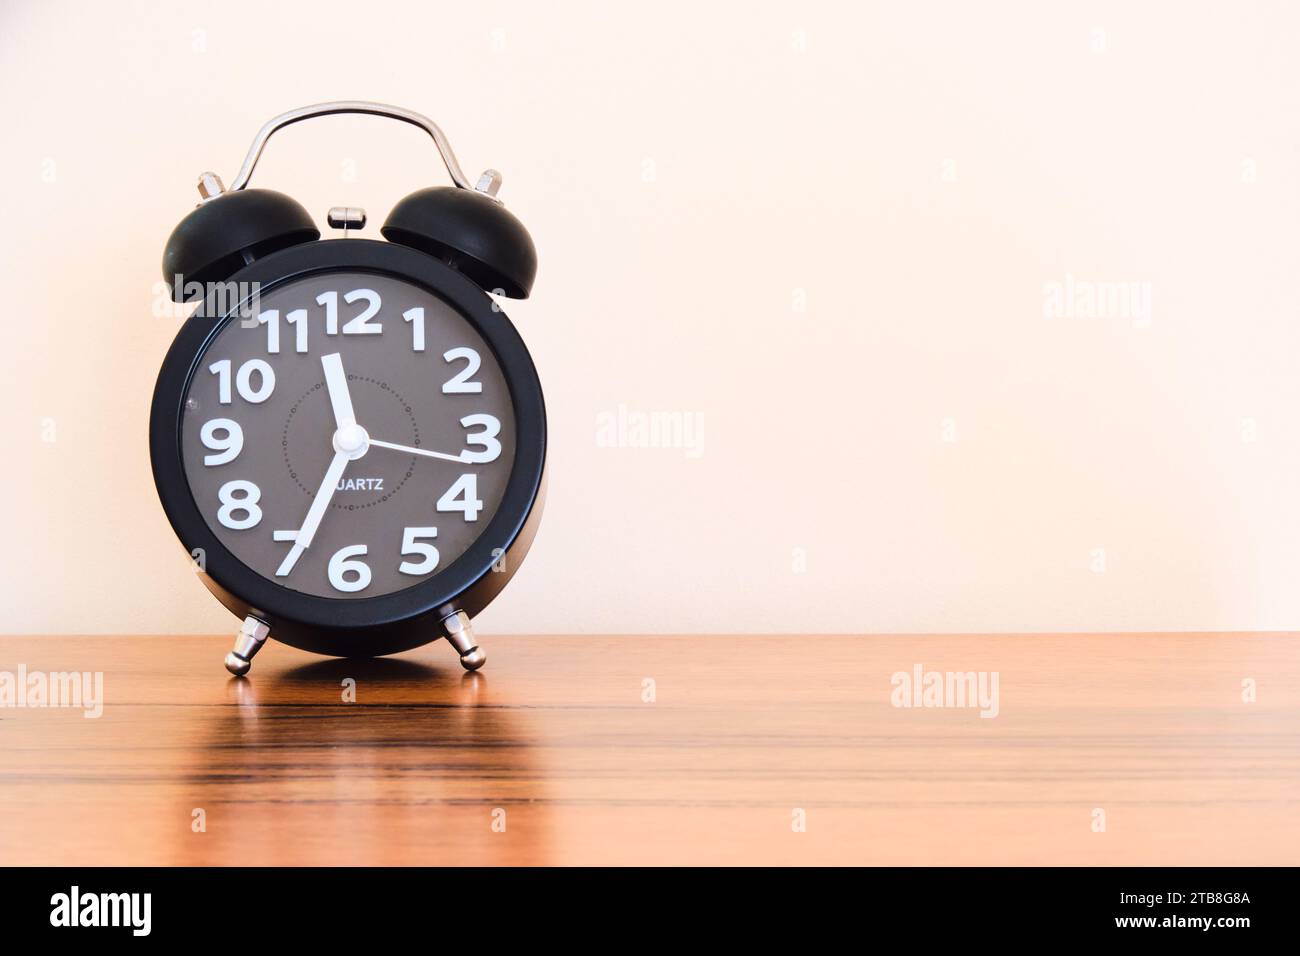 A vintage style alarm clock on a wooden table showing the time as late morning with natural daylight coming in. Copy space to the right. Stock Photo